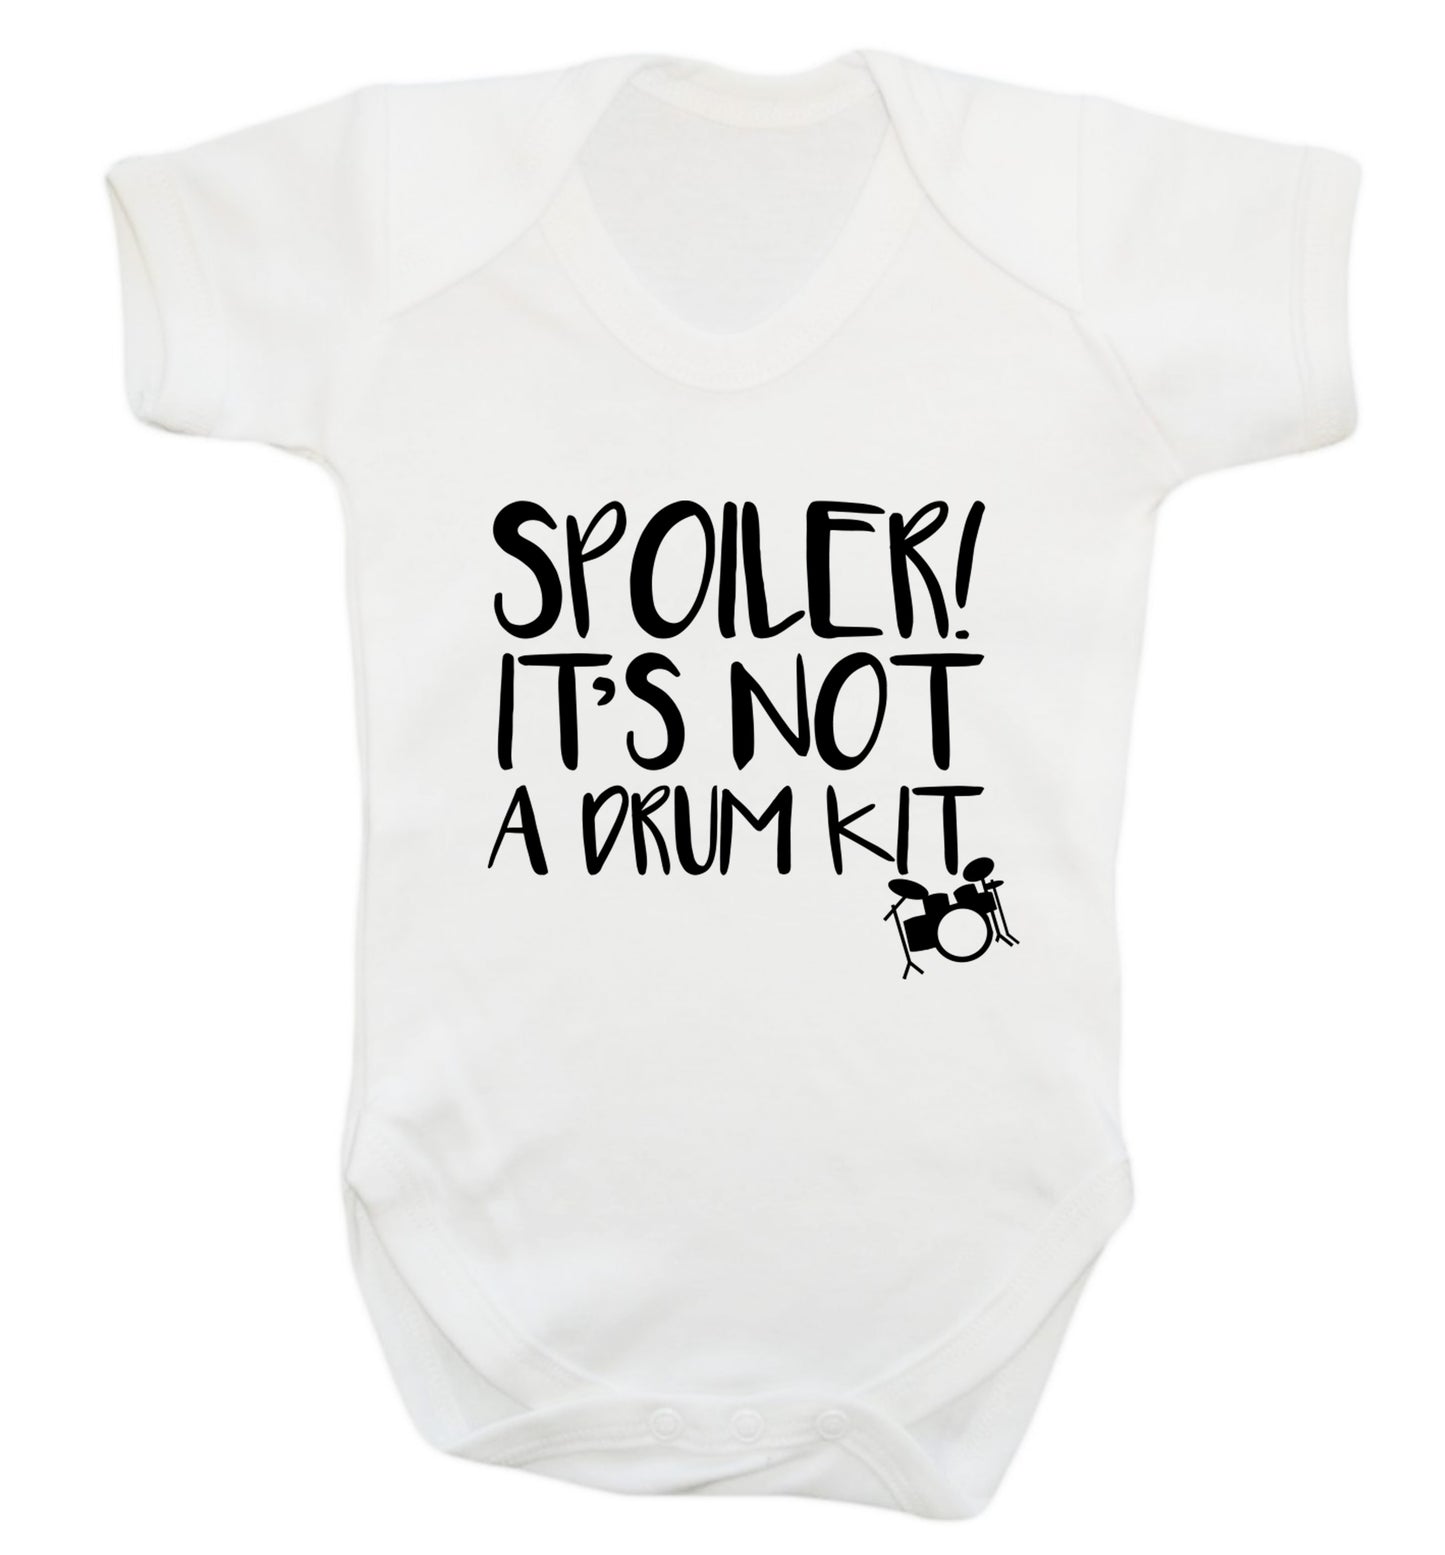 Spoiler it's not a drum kit Baby Vest white 18-24 months